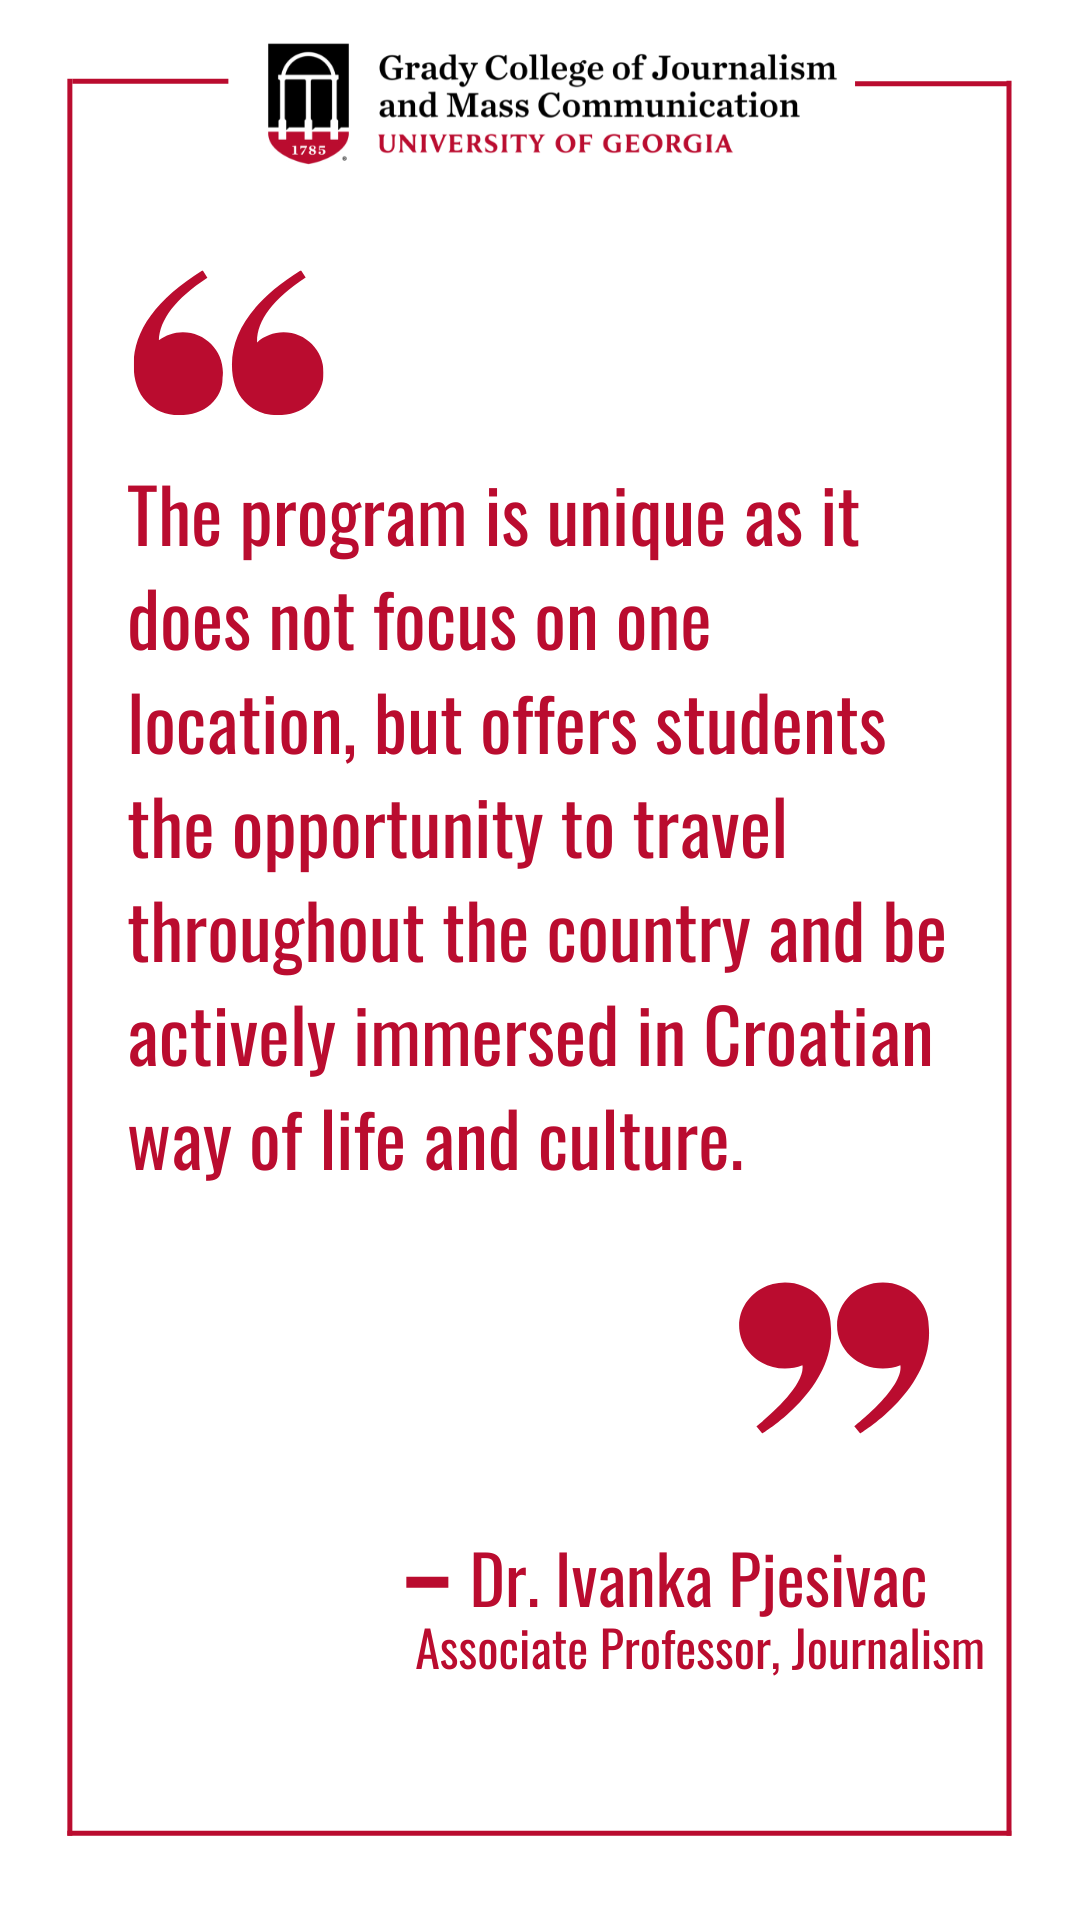 Quote graphic that reads "The program is unique as it does not focus on one location, but offers students the opportunity to travel throughout the country and be actively immersed in Croatian way of life and culture."